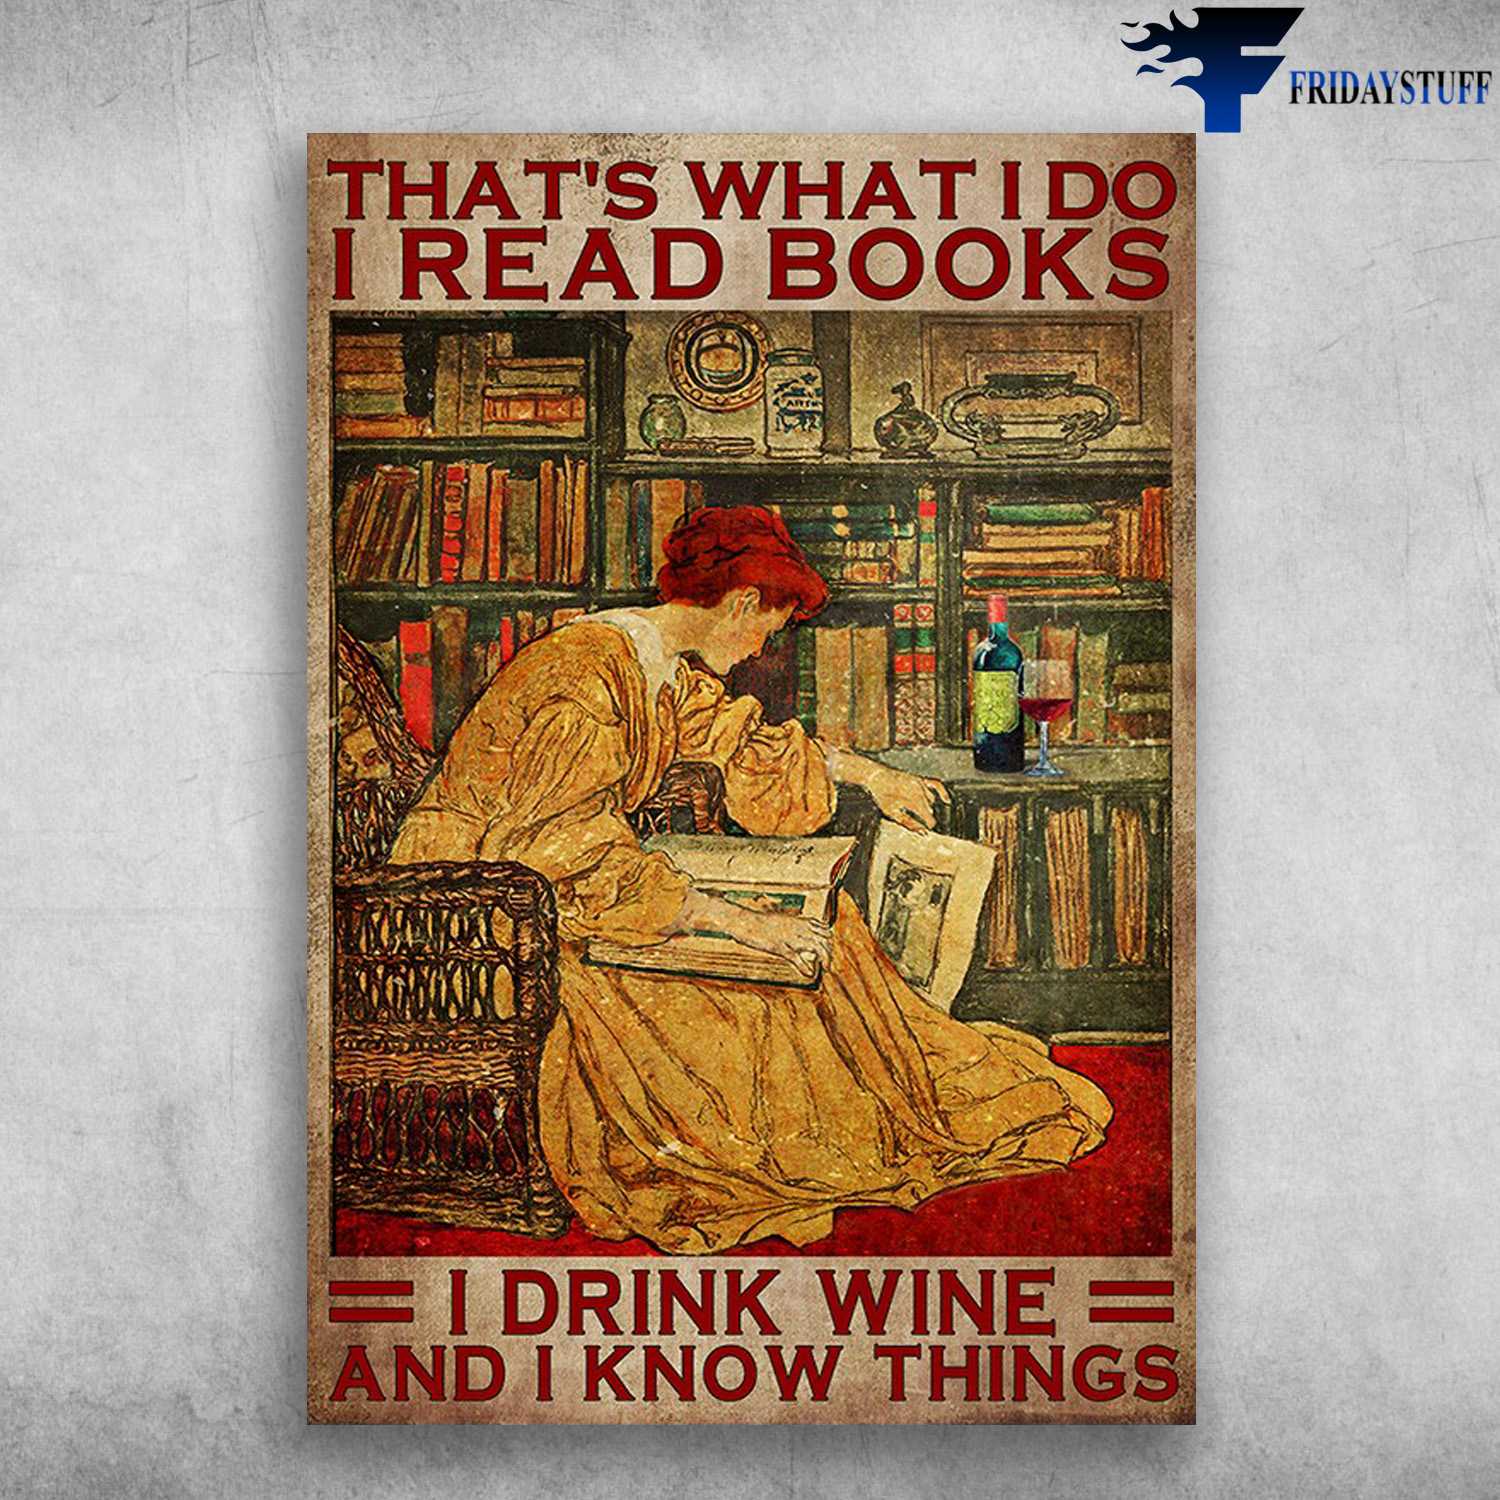 Lady Reads Book, Books and Wine - That's What I Do, I Read Books, I Drink Wine, And I Know Things